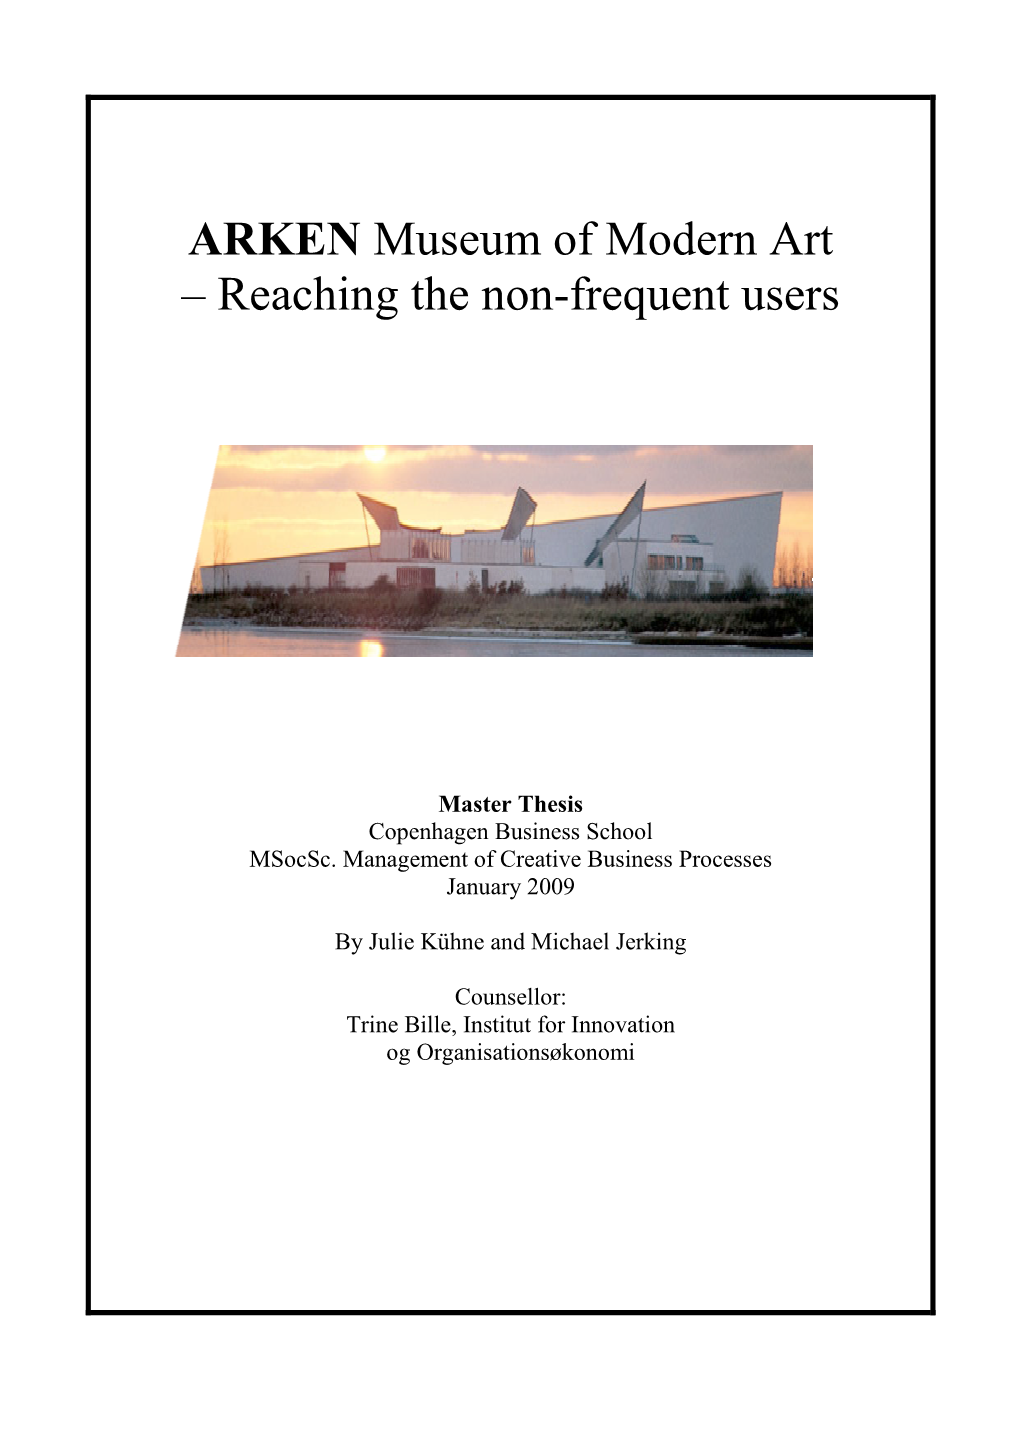 ARKEN Museum of Modern Art – Reaching the Non-Frequent Users Master Thesis, CBS/Msocsc